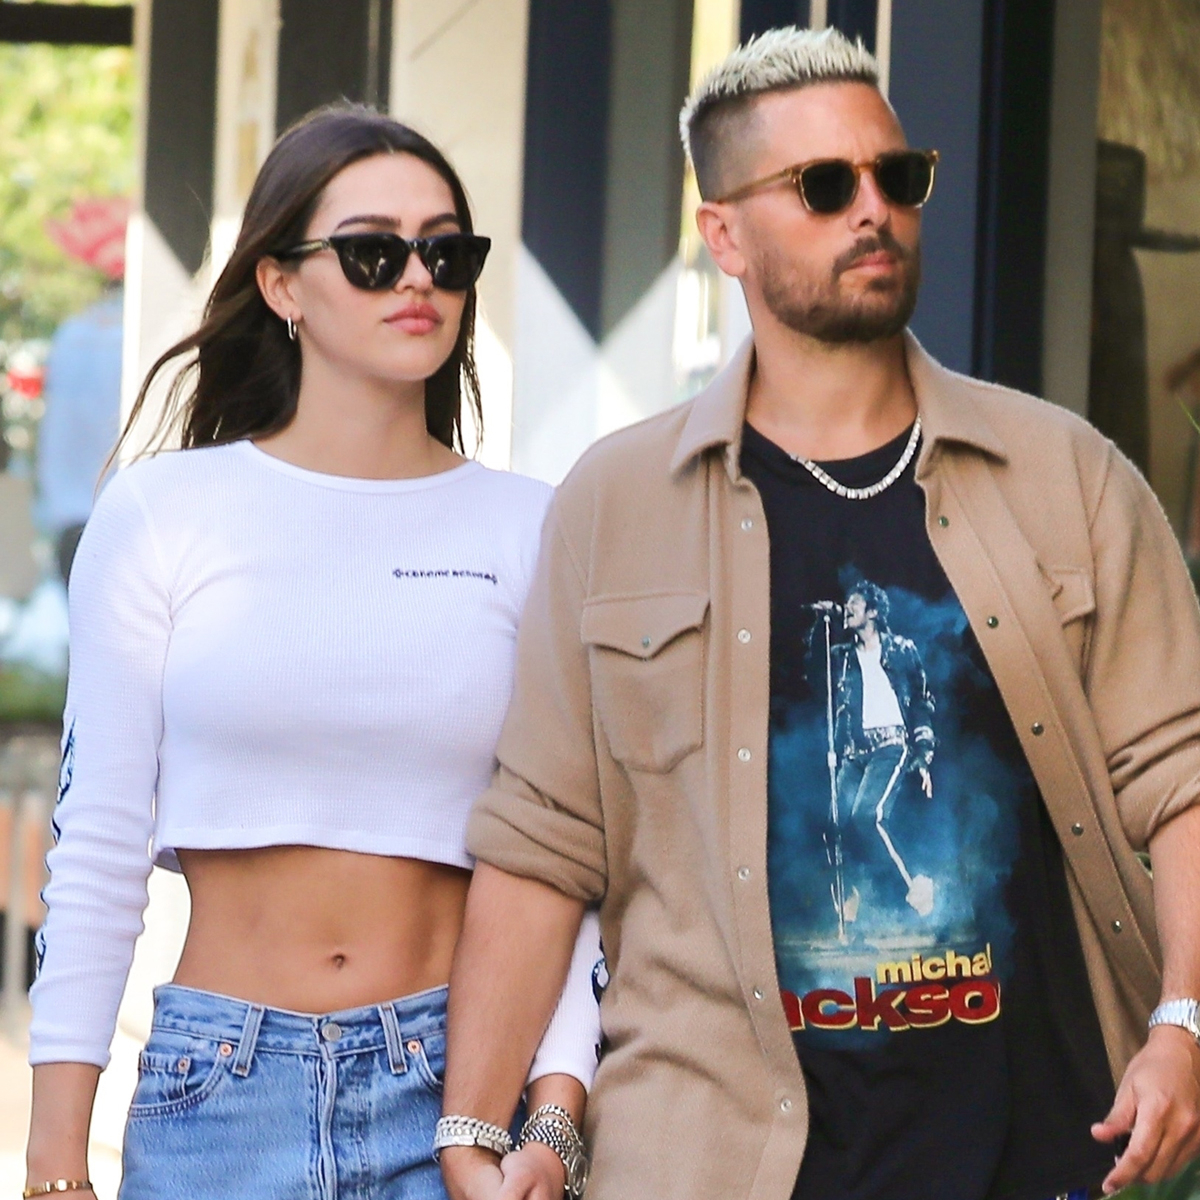 Scott Disick And Amelia Hamlin Get Cozy While Tanning In Cute Pda Pics